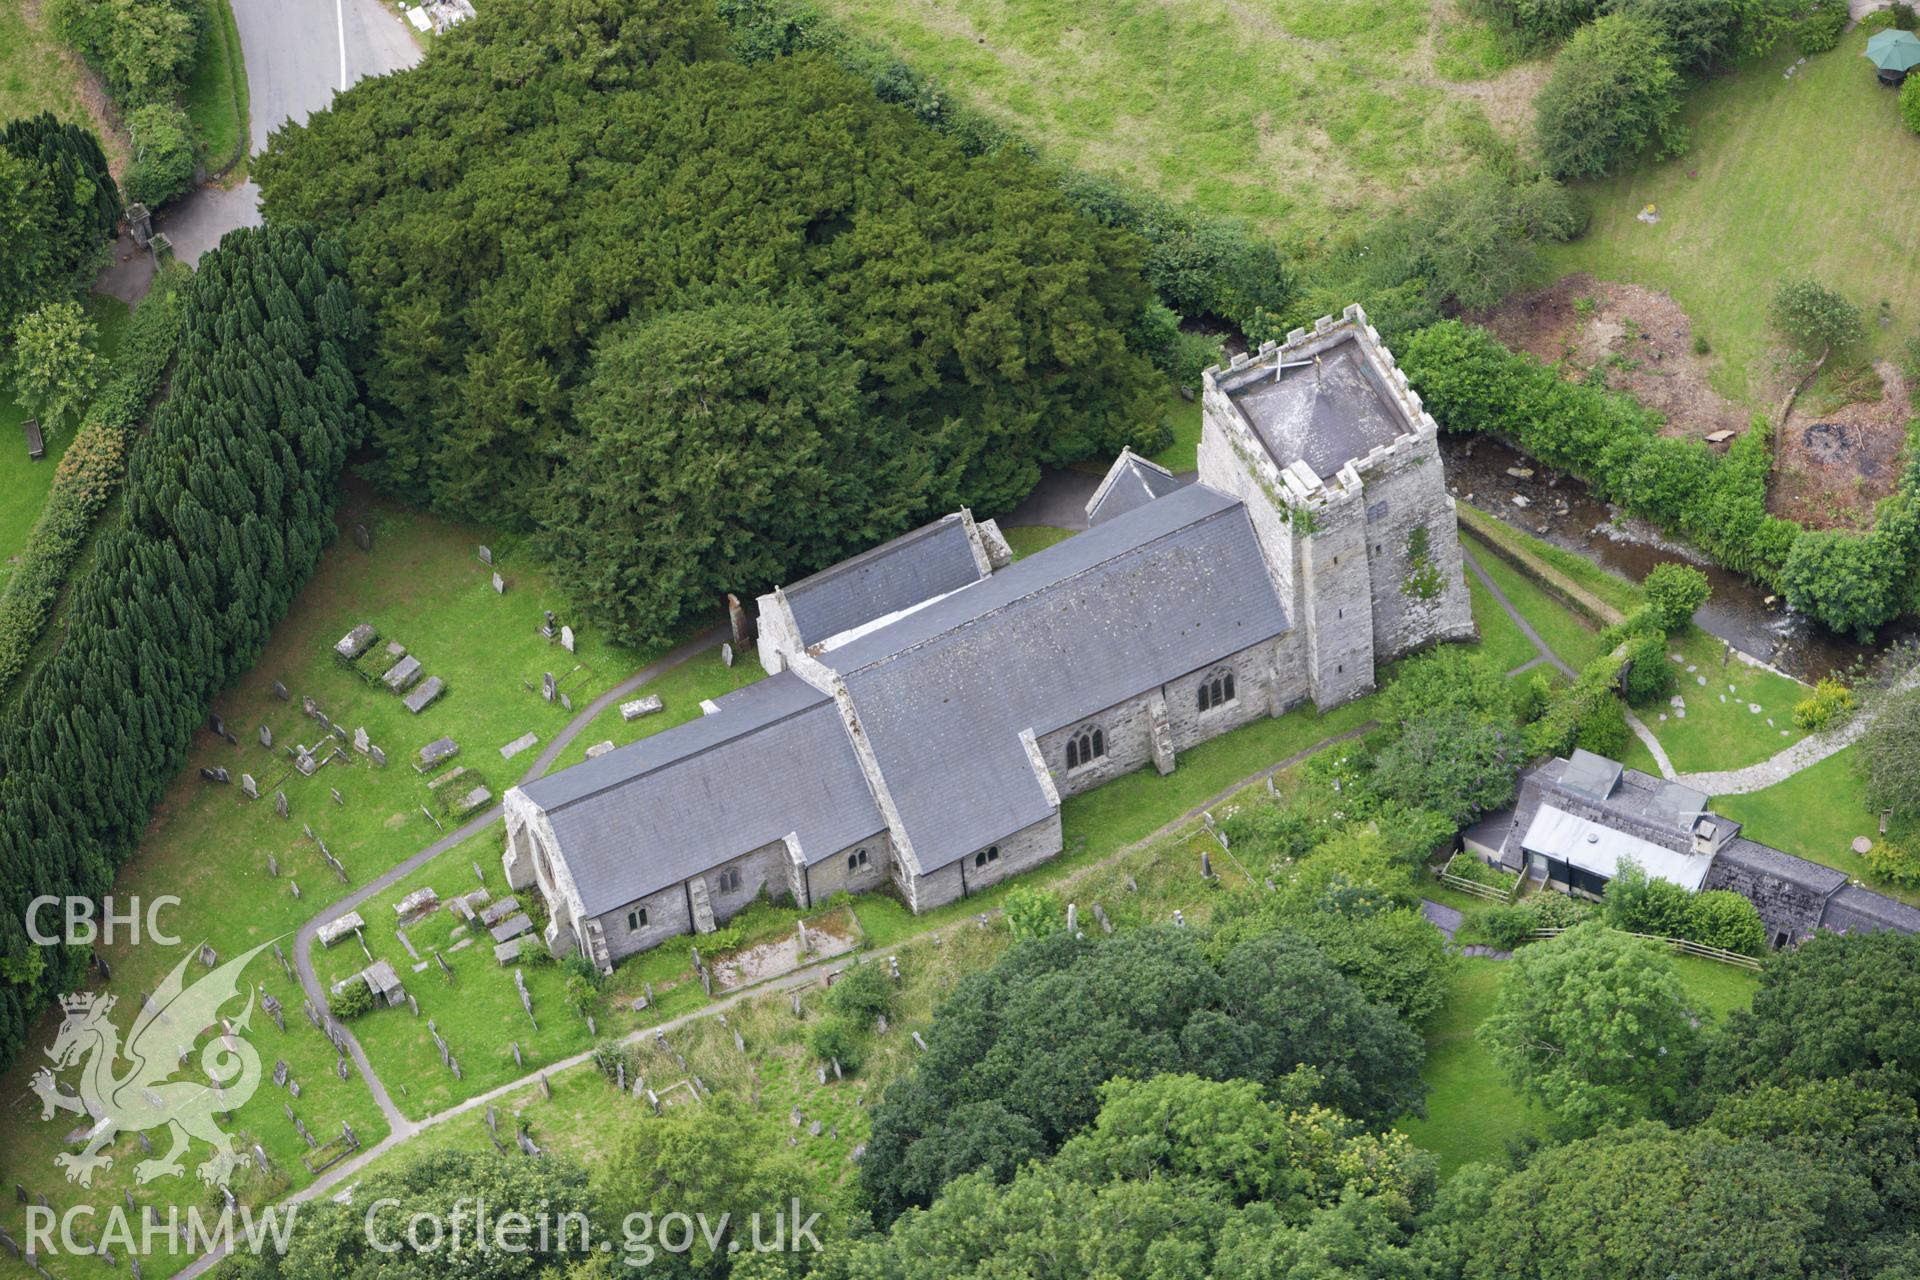 RCAHMW colour oblique aerial photograph of St Brynach's Church, Nevern. Taken on 09 July 2009 by Toby Driver